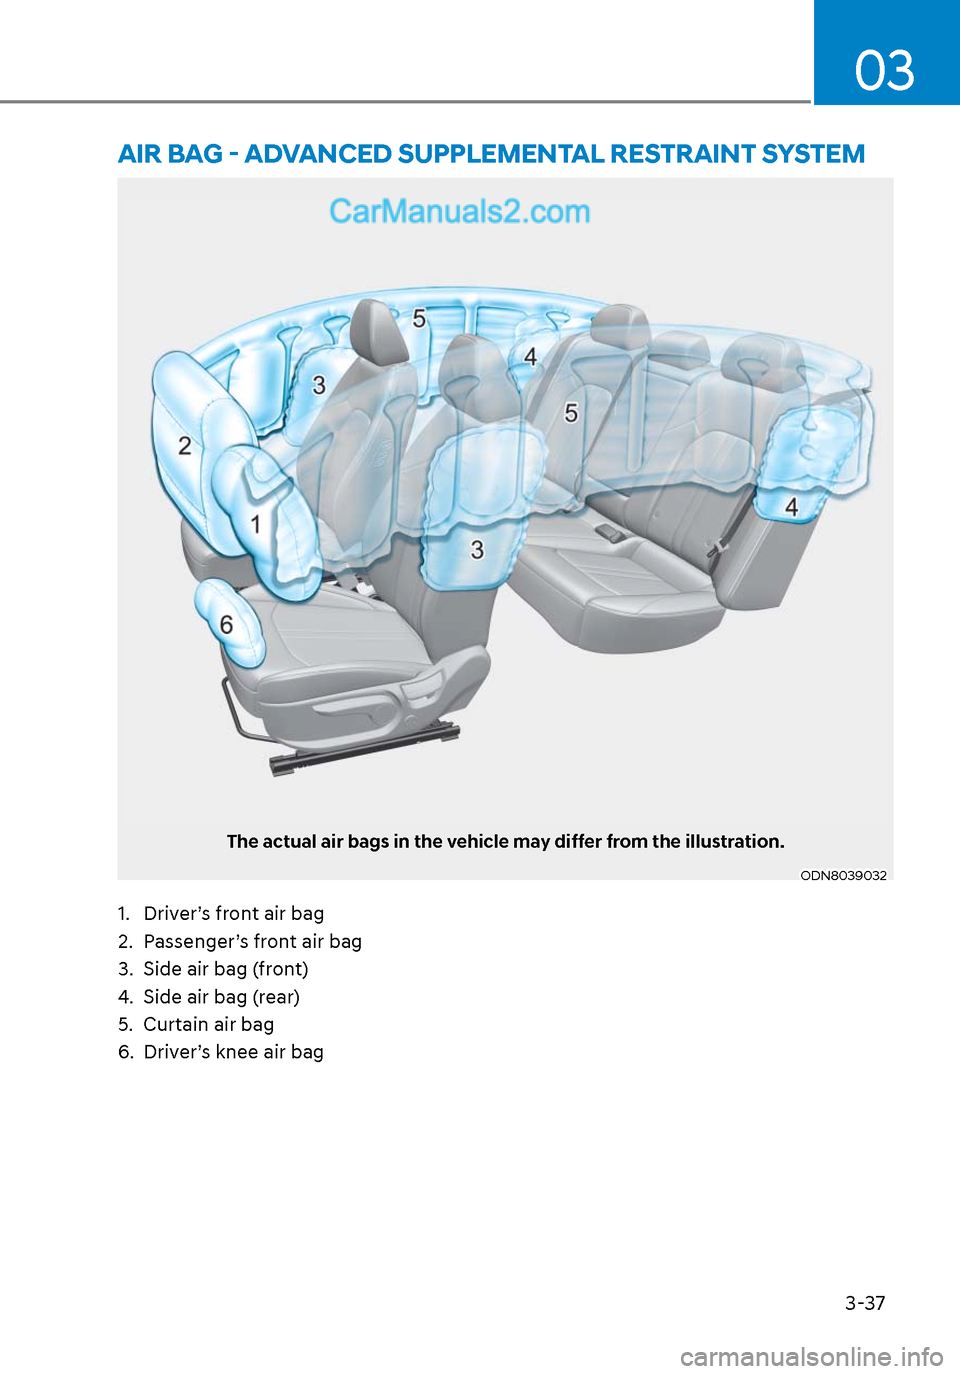 Hyundai Sonata 2020 Repair Manual 3-37
03
AIR BAG - ADVANCED SUPPLEMENTAL RESTRAINT SYSTEM
The actual air bags in the vehicle may differ from the illustration.
ODN8039032ODN8039032
1.  Driver’s front air bag
2.  Passenger’s front 